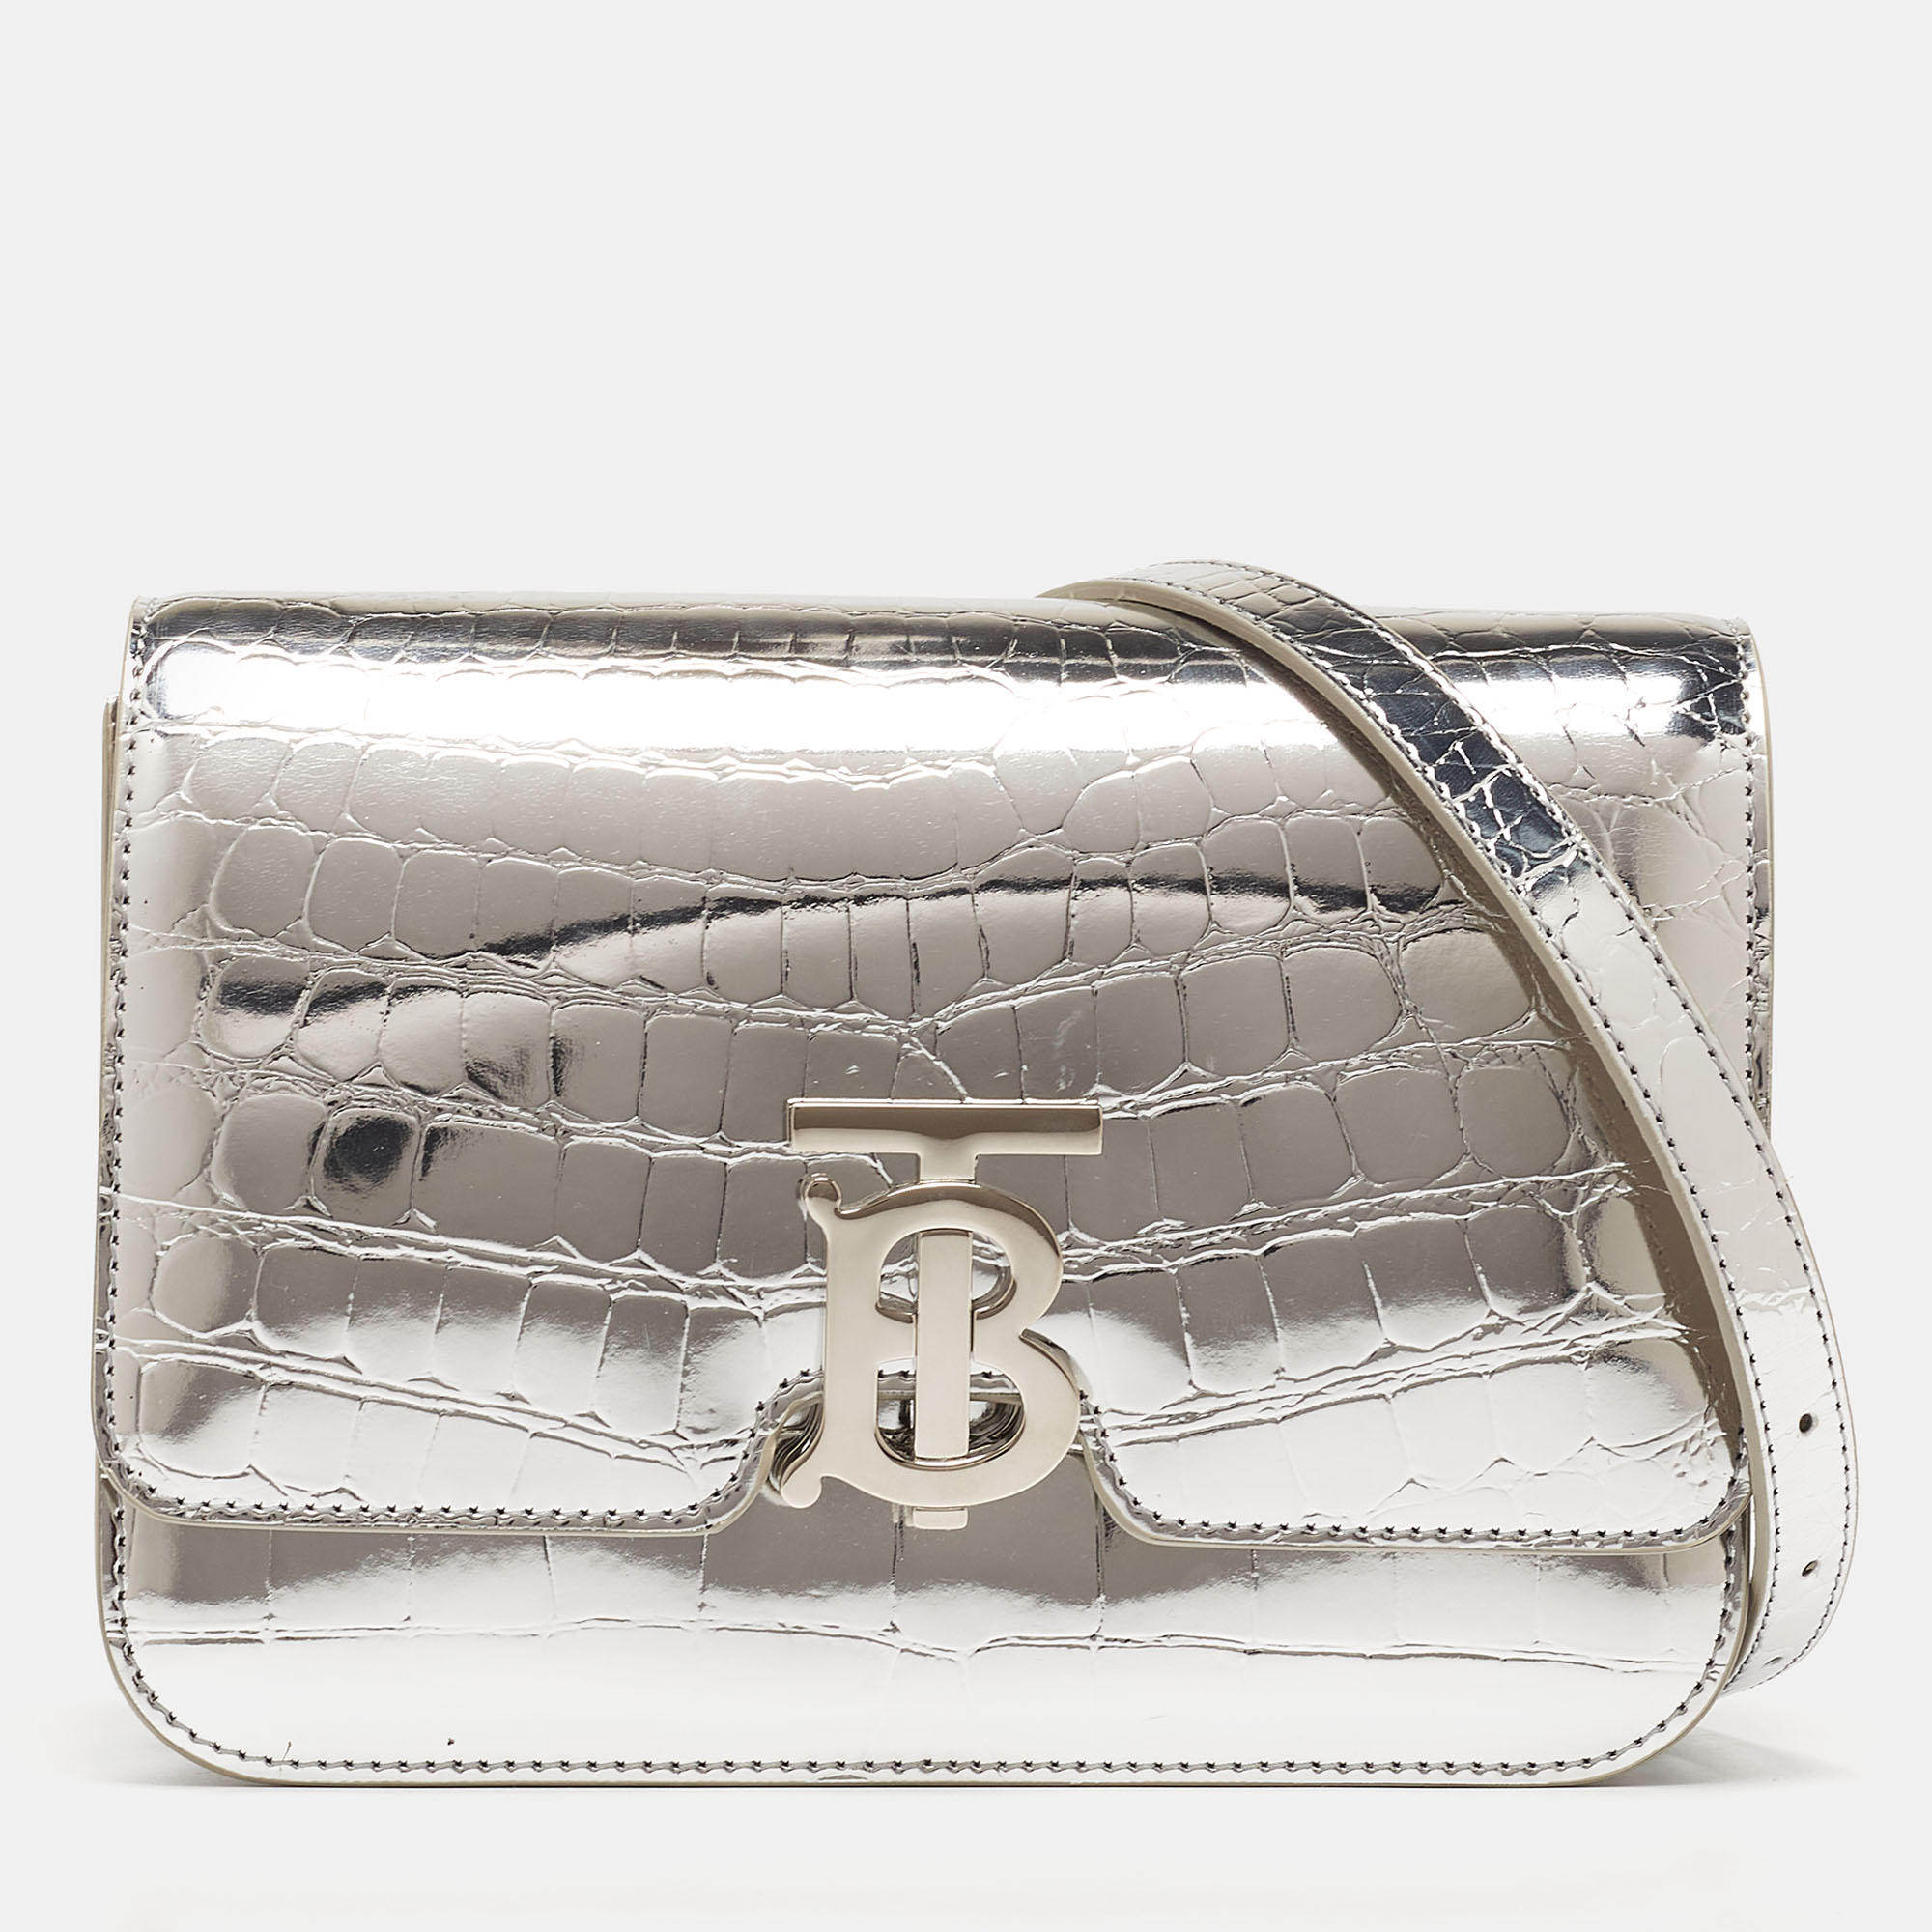 burberry silver laminated croc embossed leather tb flap shoulder bag